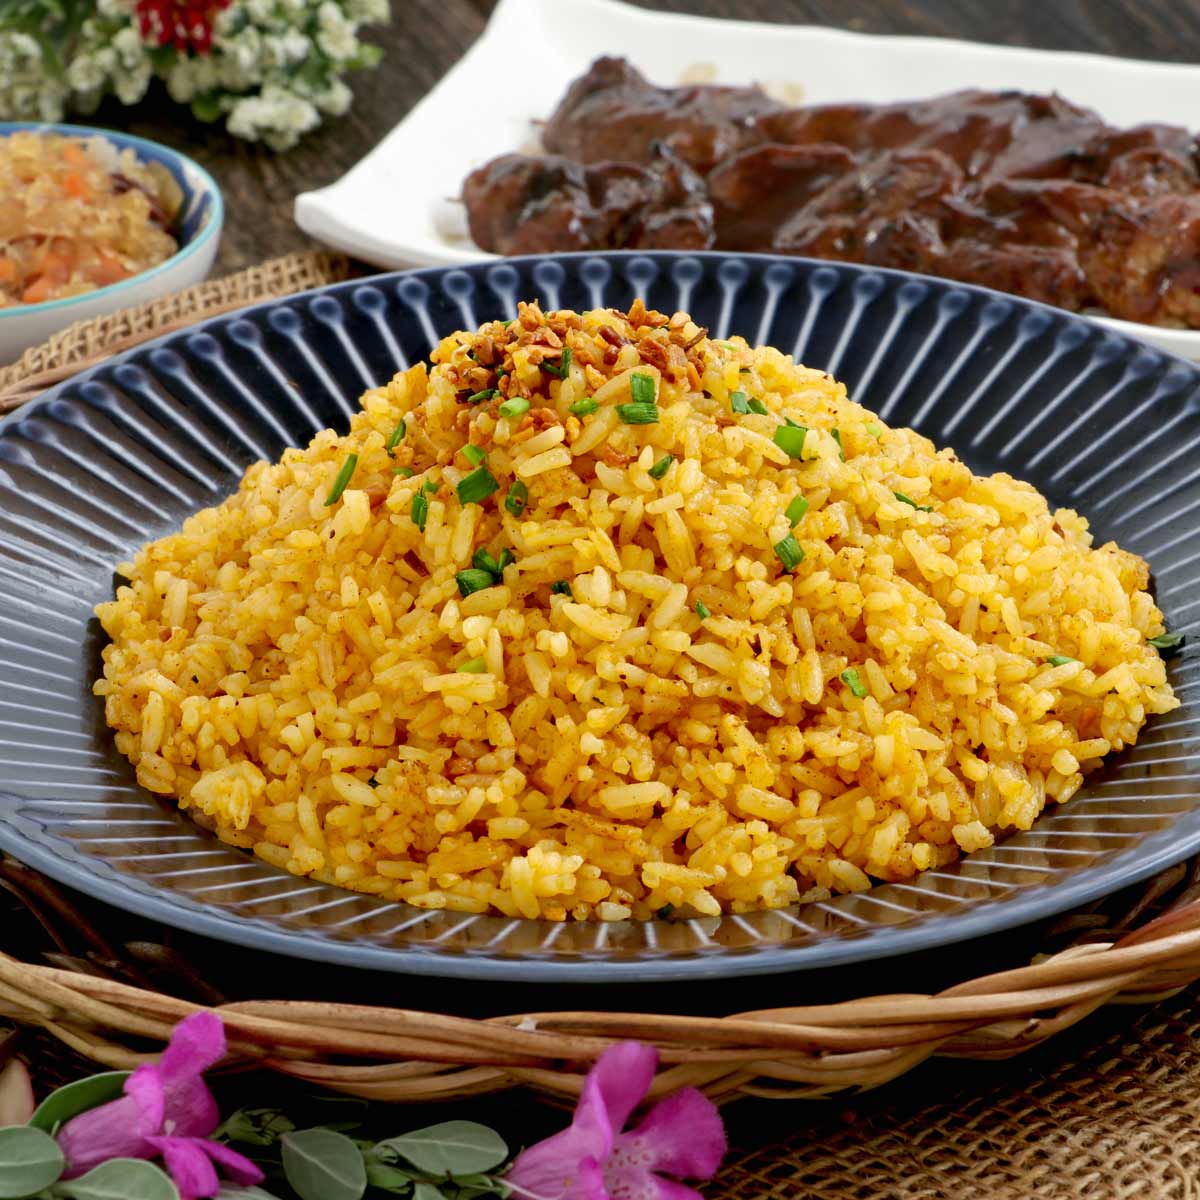 Vibrant yellow and flavorful fried rice on a plate.